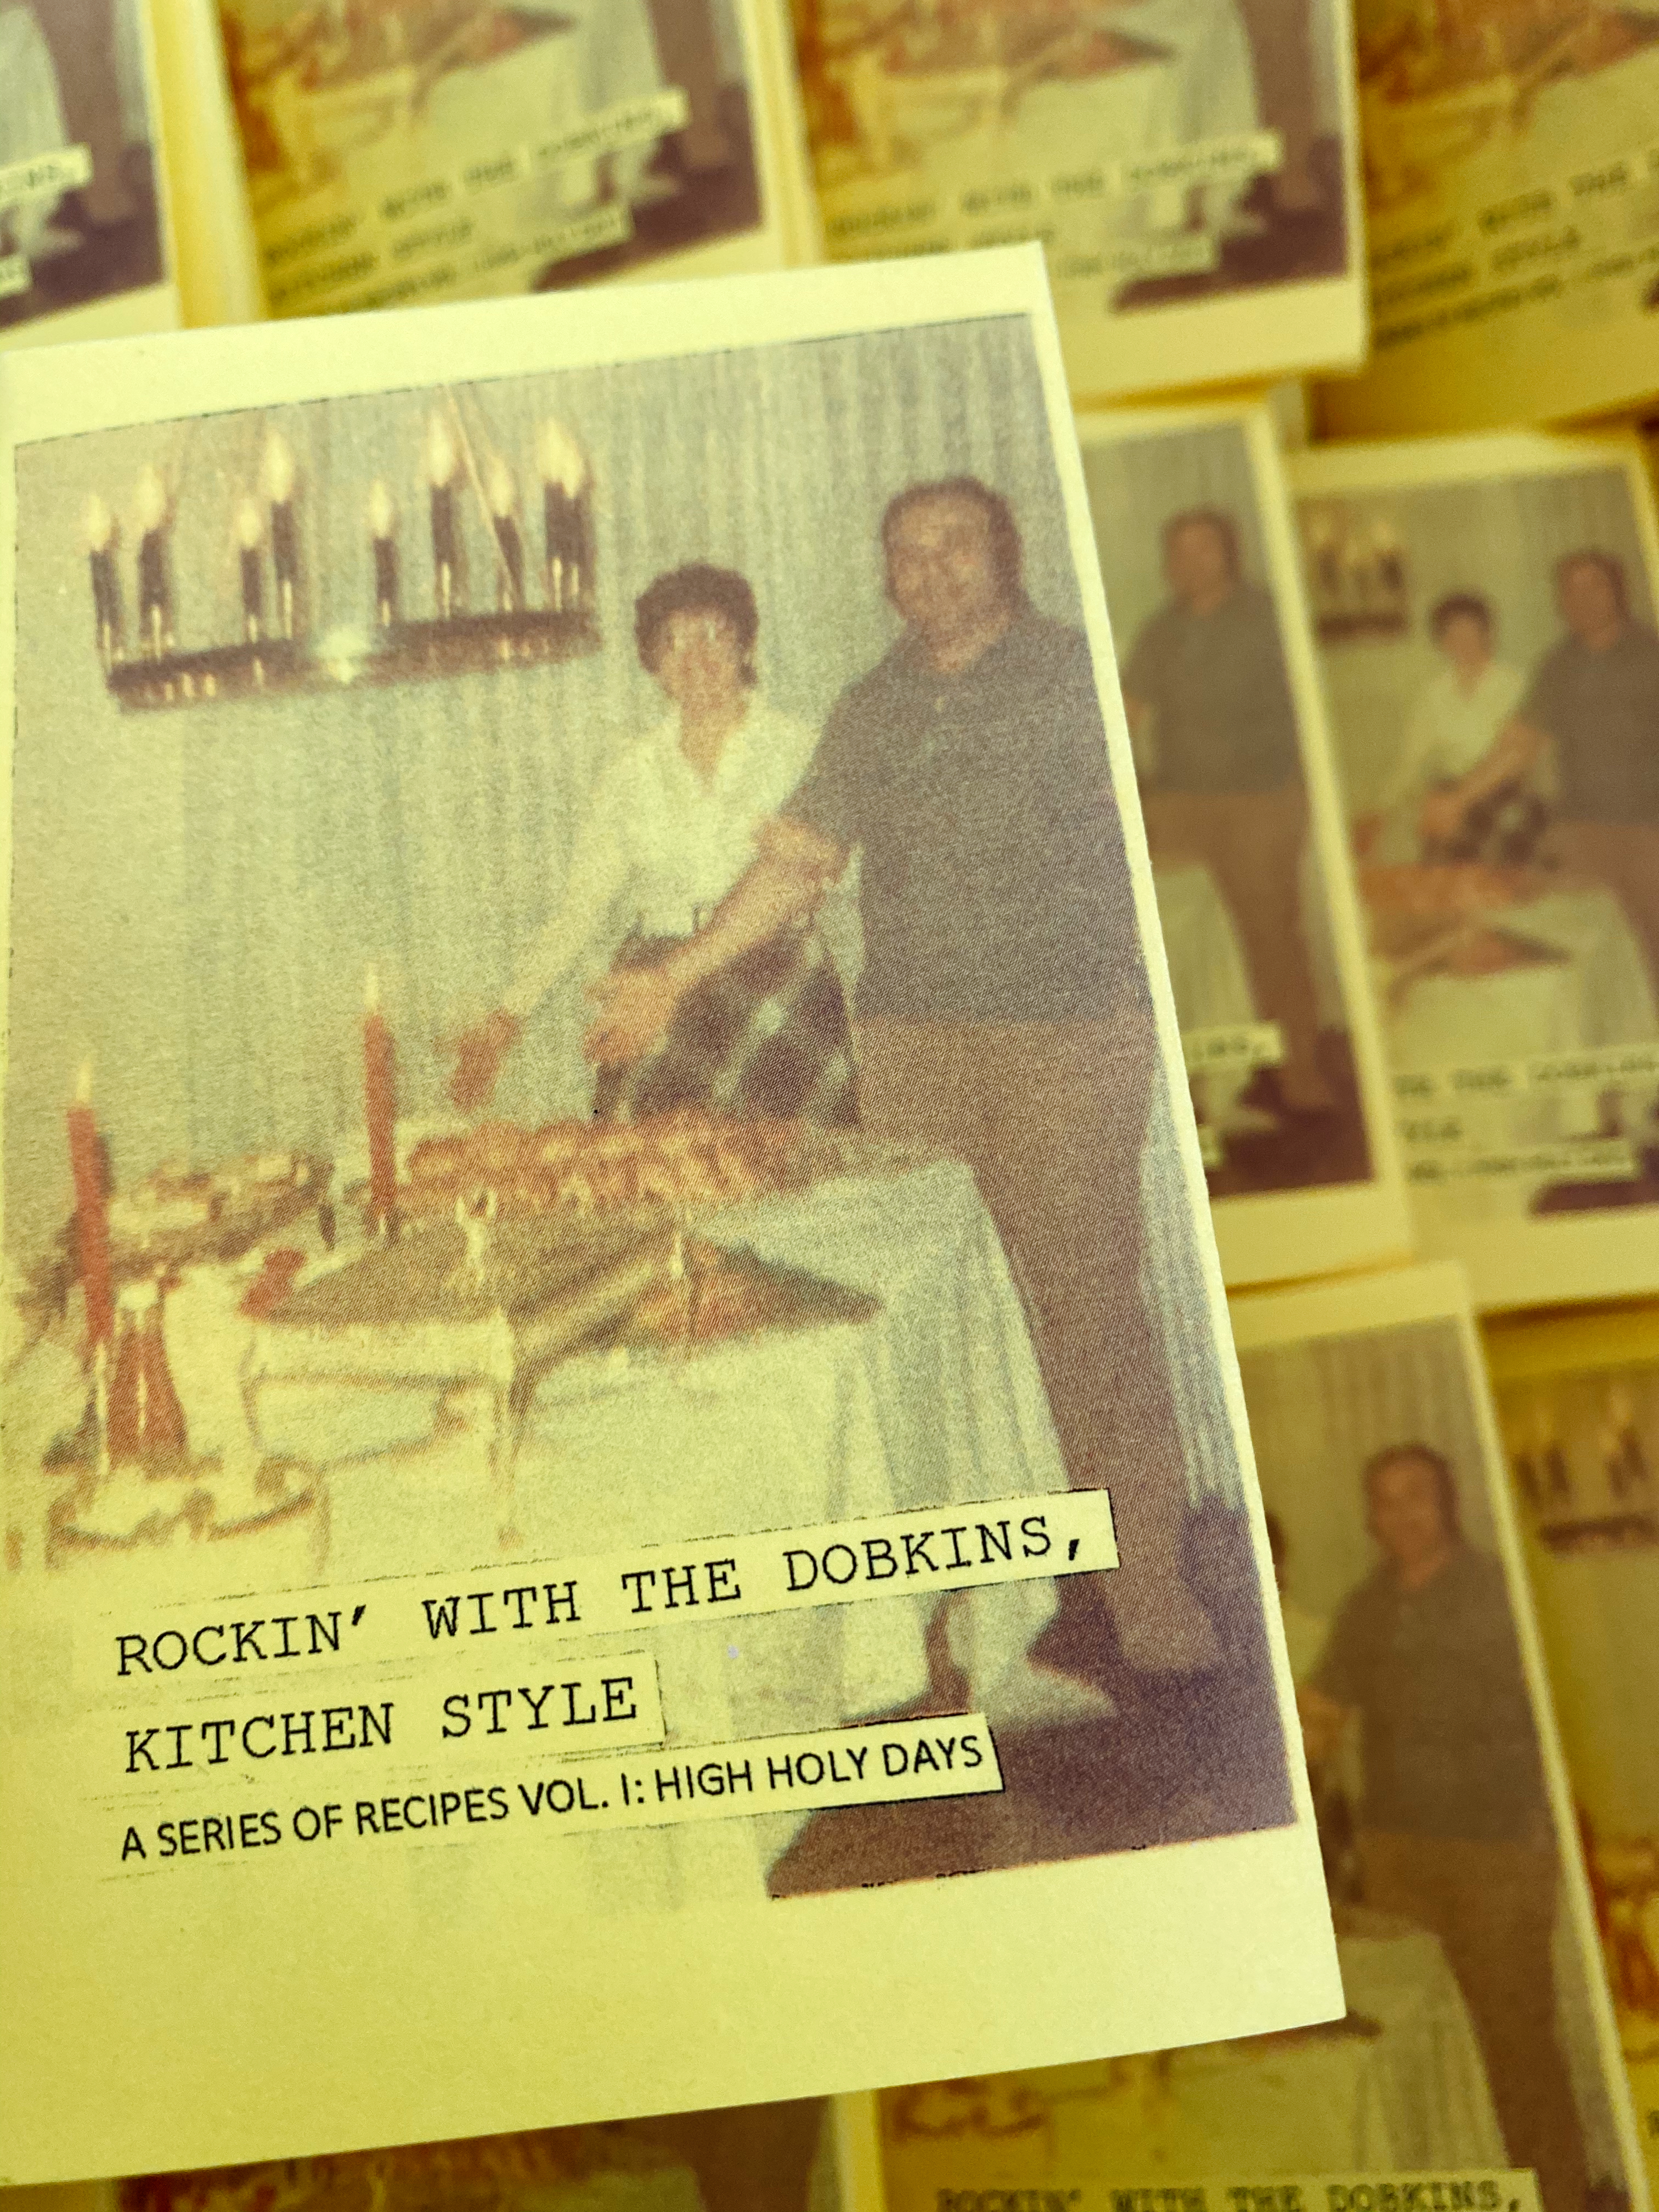 Emily's zine titled "Rockin' with the Dobkins, Kitchen Style: A Series of Recipes Vol 1: High Holy Days." 